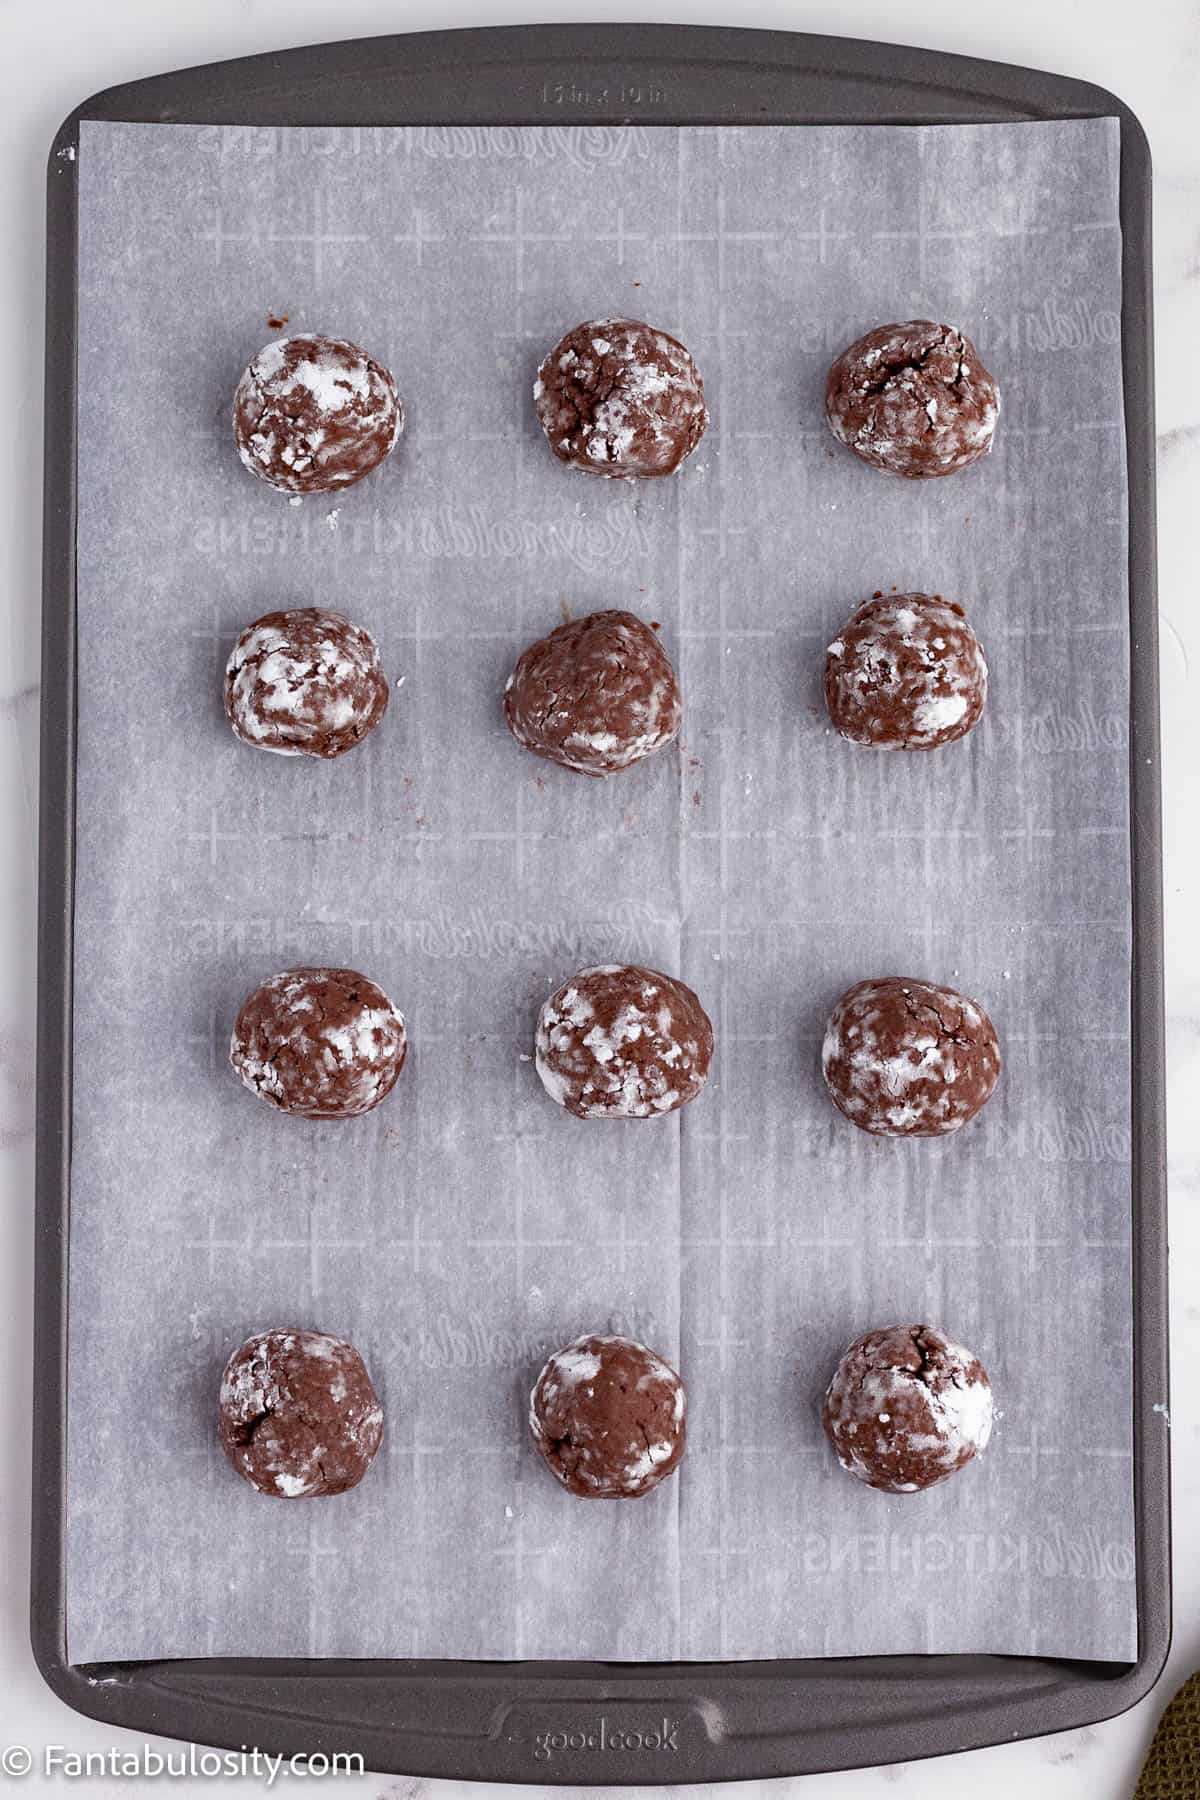 A metal baking sheet lined with parchment paper holds 12 ball of chocolate cookie dough that have been rolled in powdered sugar